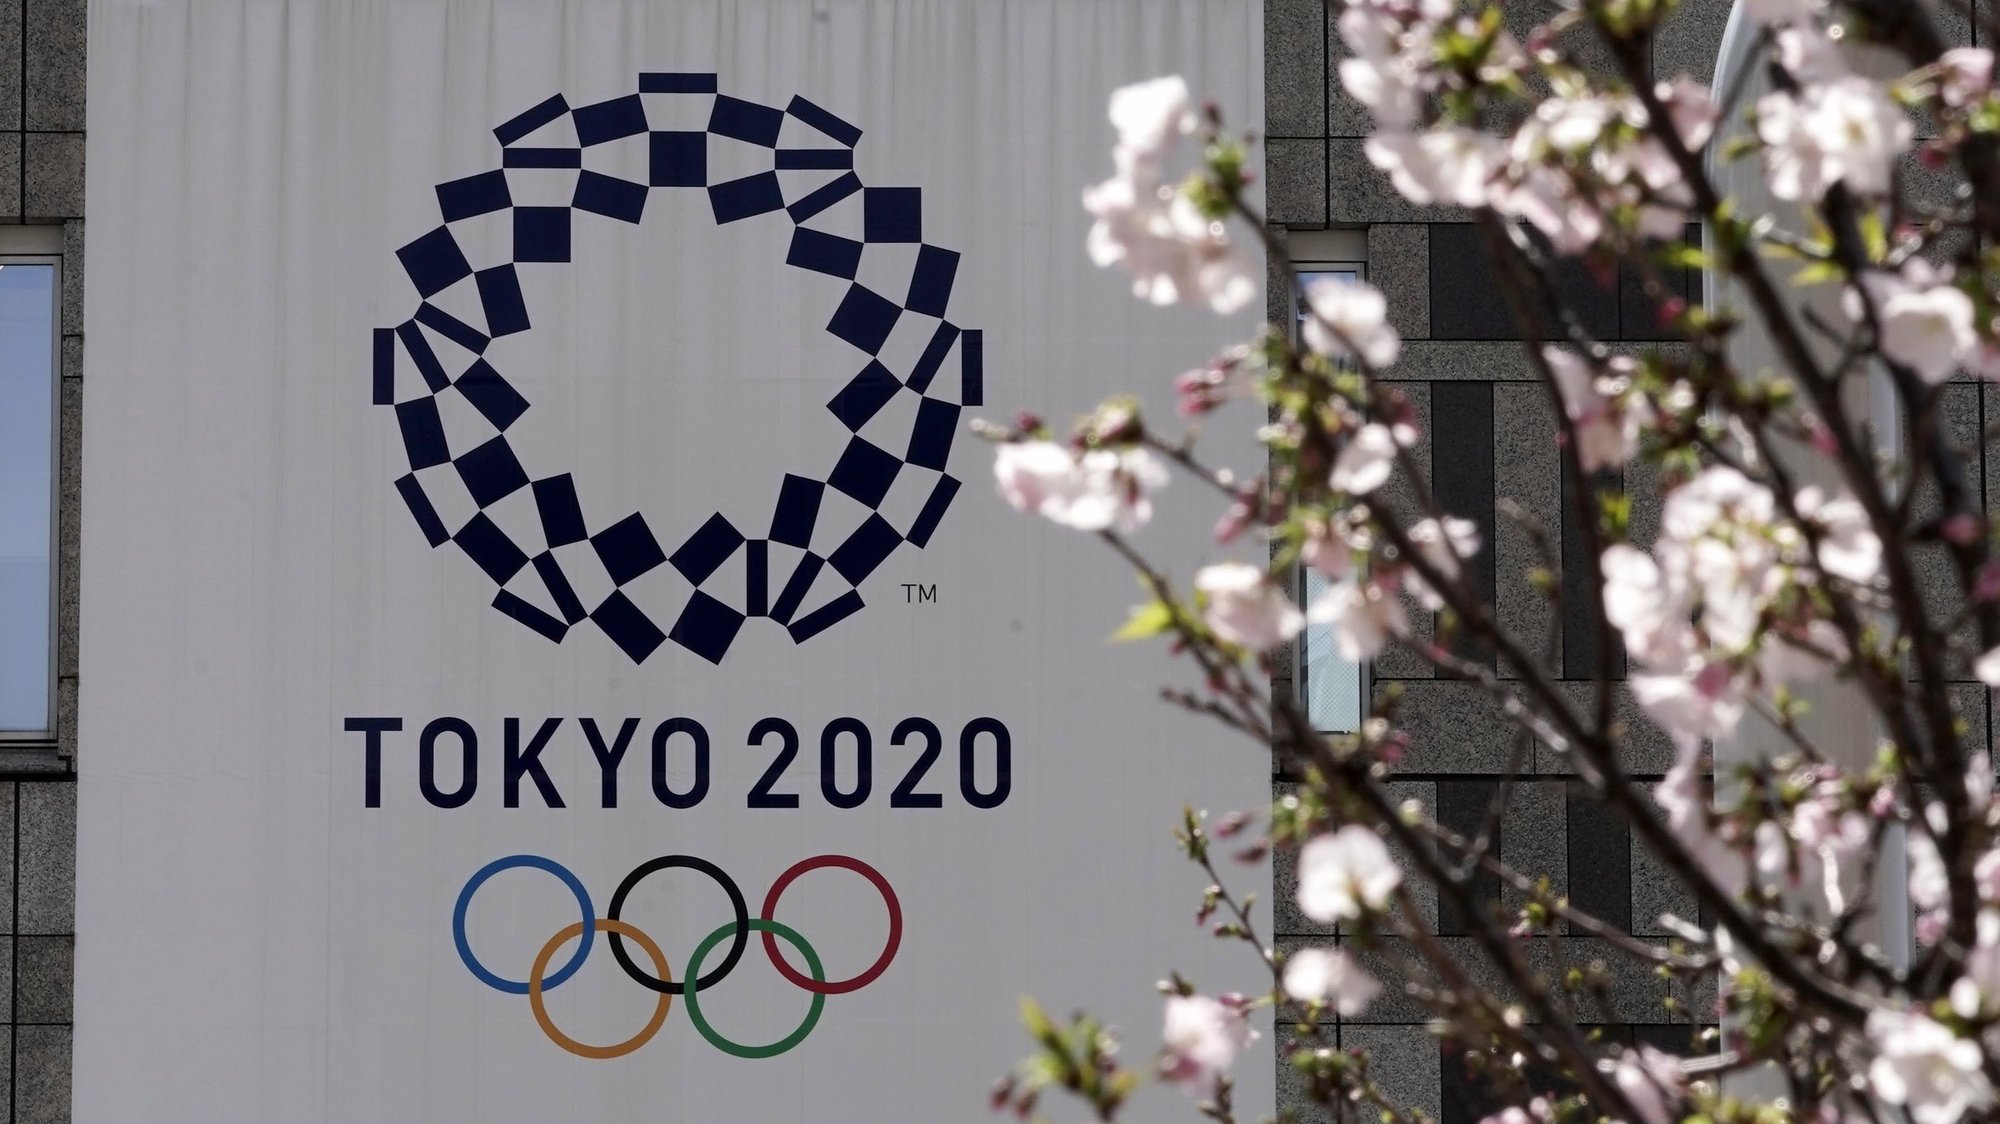 epa08338045 The logo of the Tokyo 2020 Olympic Games hangs from a wall behind cherry blossoms in Tokyo, Japan, 02 April 2020. Tokyo Governor Yuriko Koike warned the city is going through an important phase in preventing further spread of COVID-19. The Tokyo 2020 Olympics organizing committee and the International Olympic Committee (IOC) announced on 30 March 2020 that the Games would be rescheduled to 23 July 2021 amid the ongoing coronavirus pandemic that forced the event’s one year postponement.  EPA/KIMIMASA MAYAMA